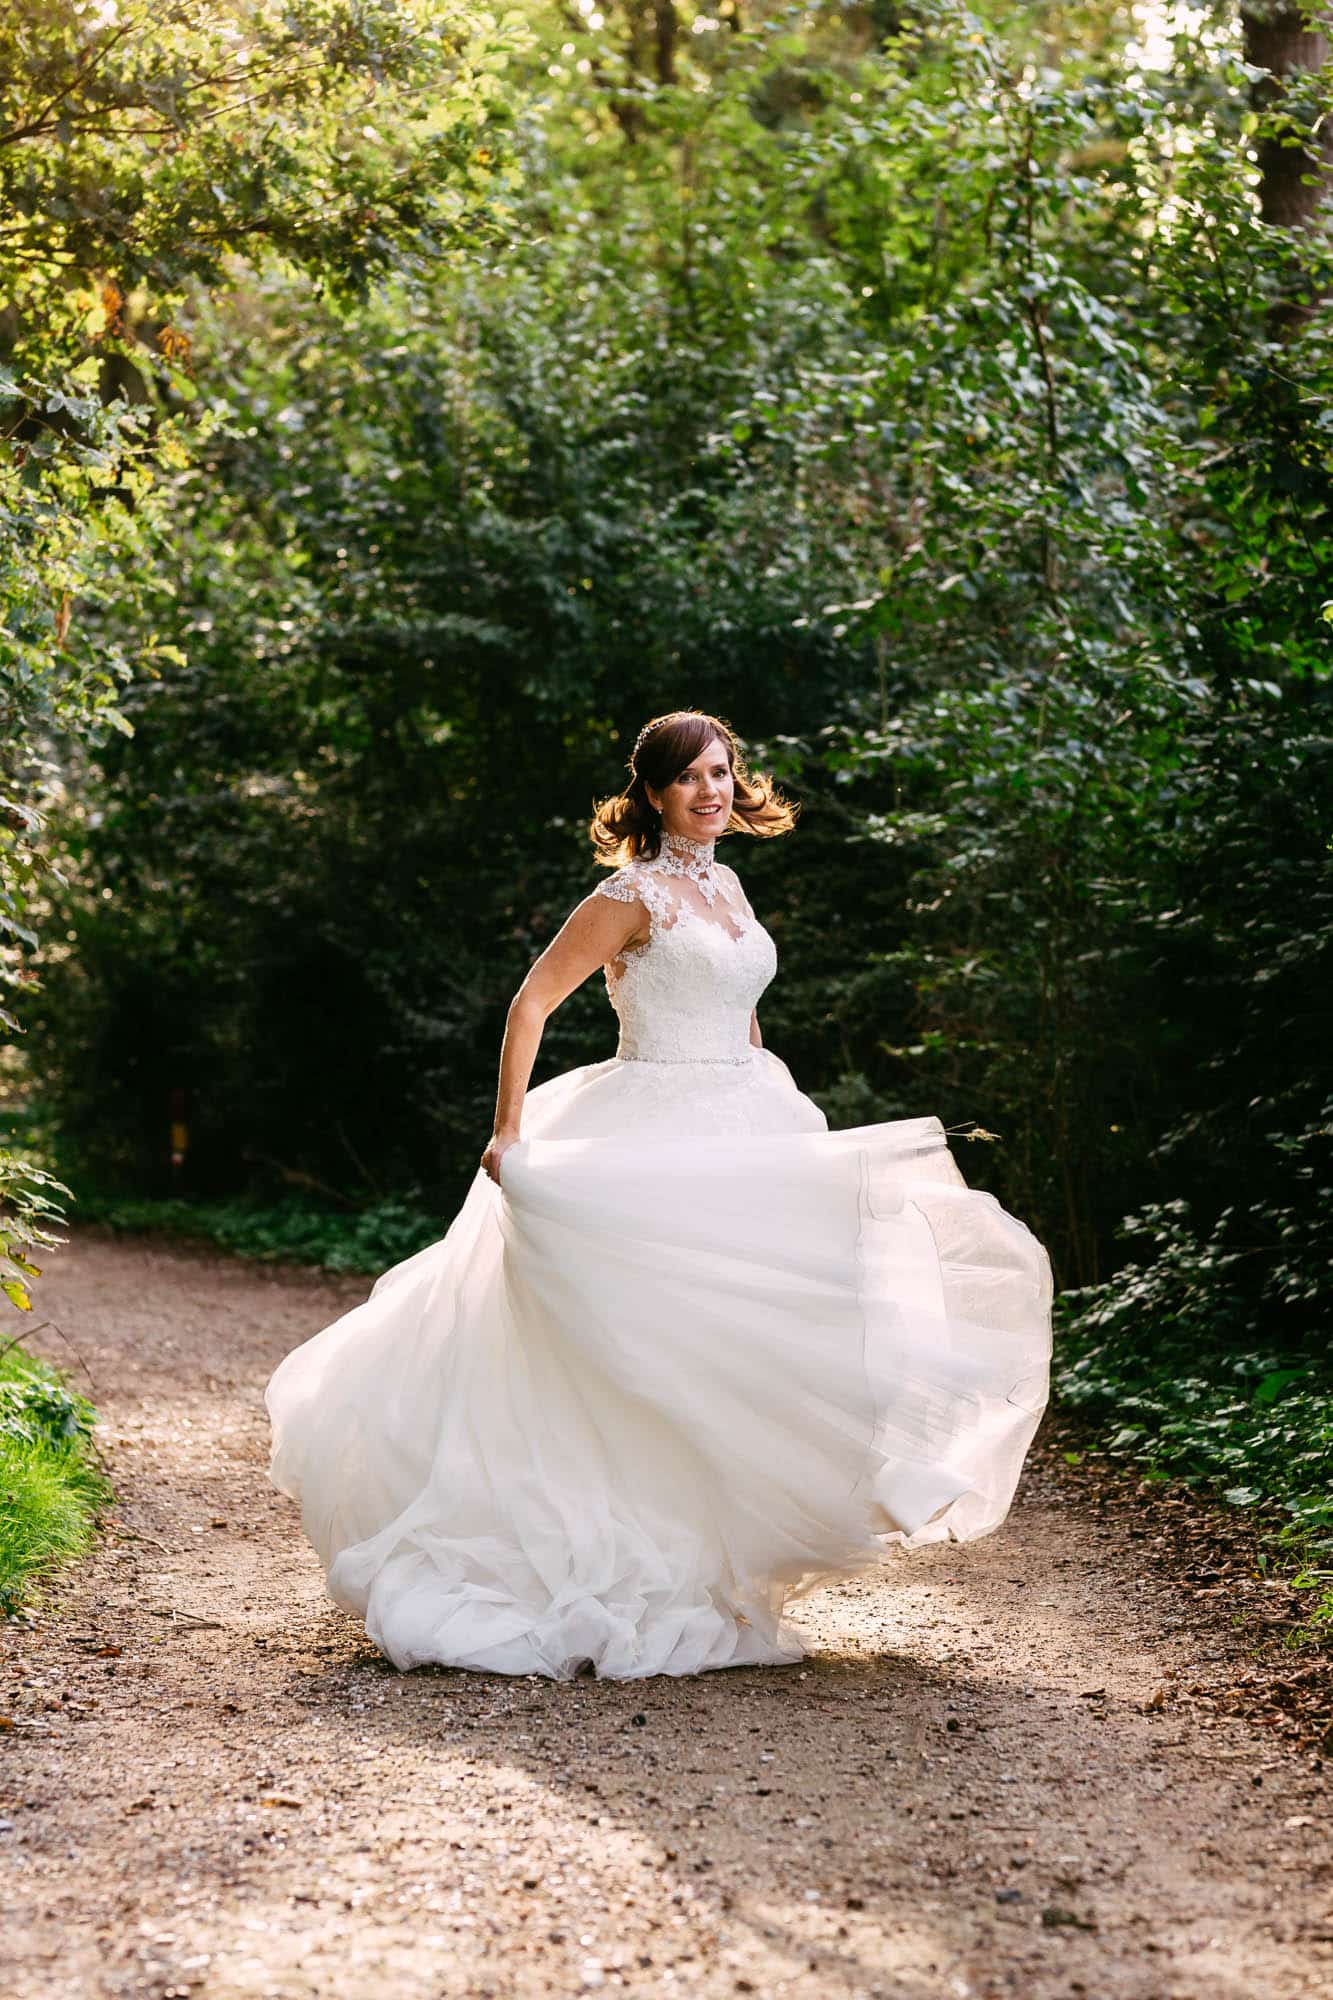 A bride in a beautiful A-line wedding dress runs happily along a forest path.